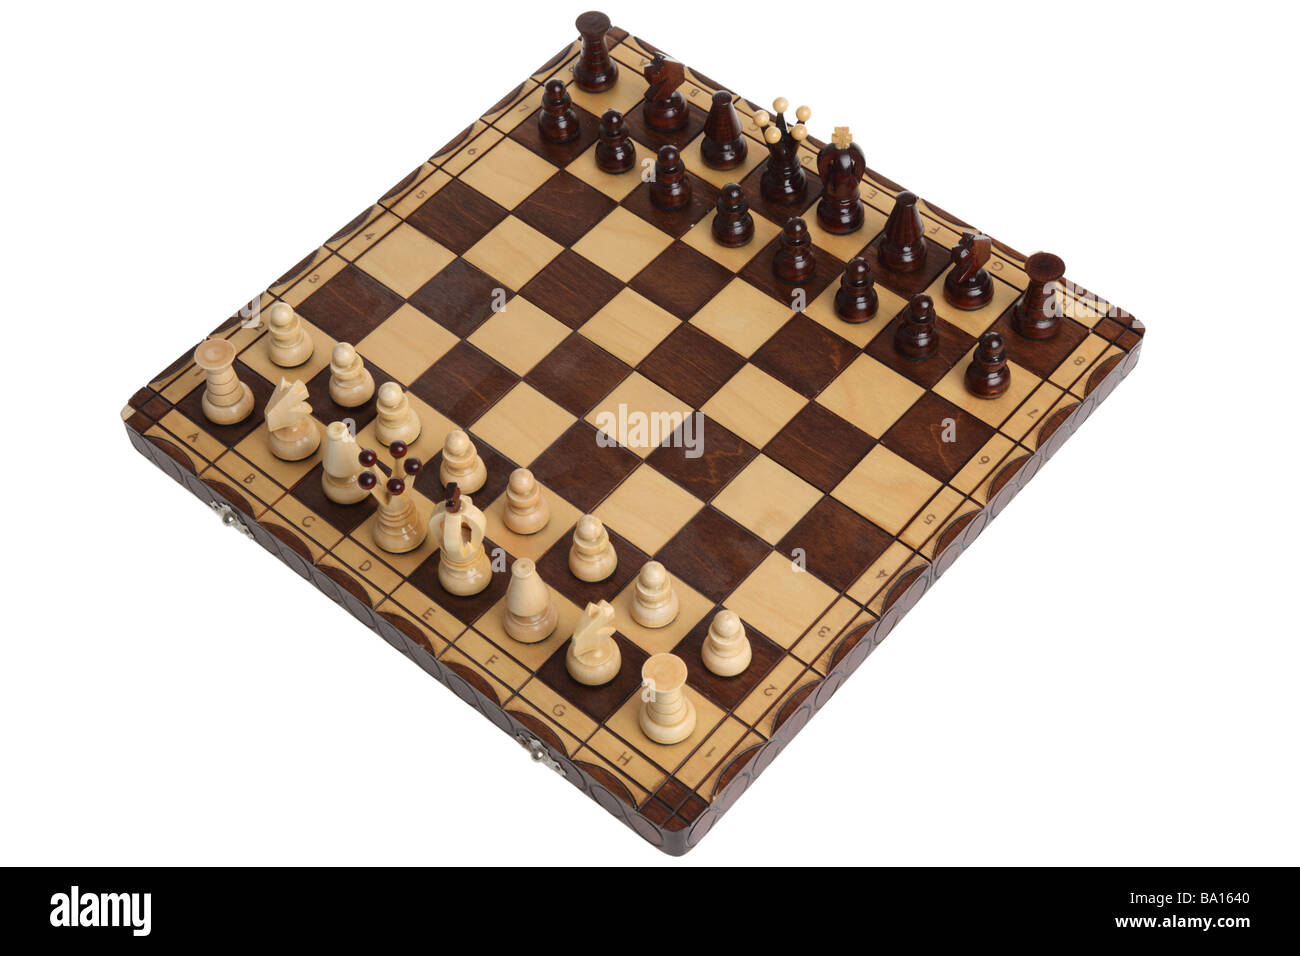 Chess board cutout on white background Stock Photo